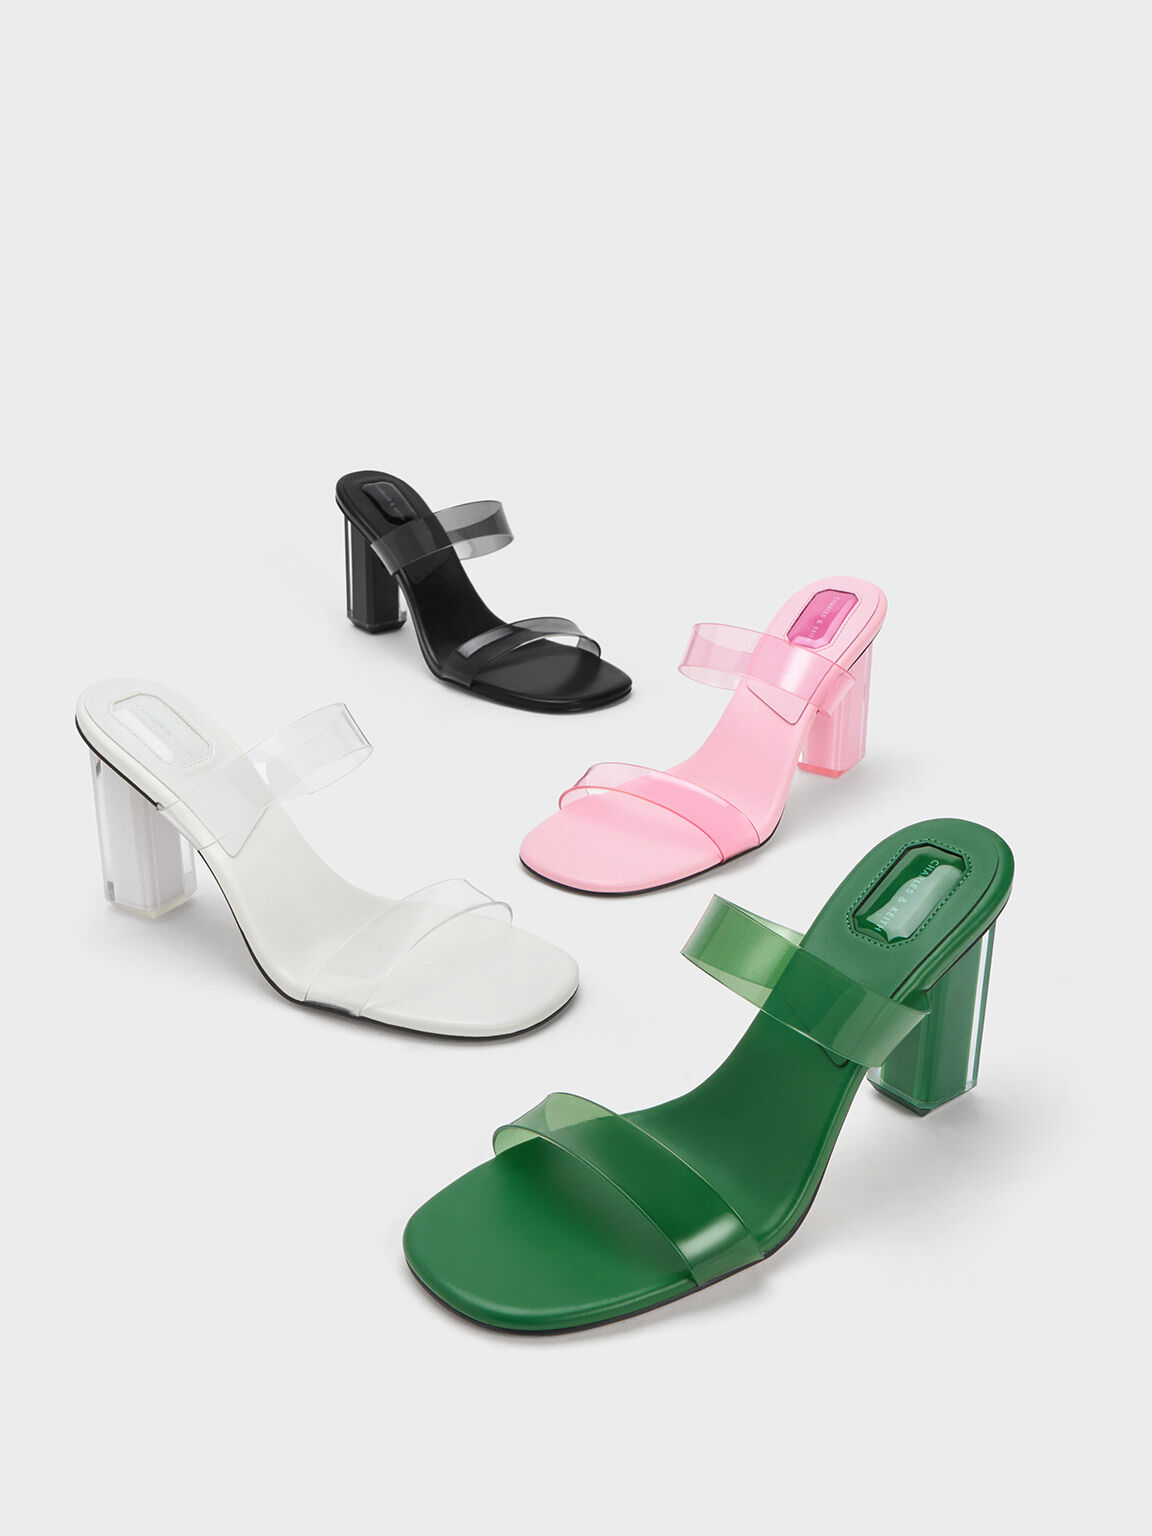 CHARLES & KEITH SPRING/SUMMER 2019, From geometric bags to sculptural  heels, this season's unconventional styles will breathe new life into your  wardrobe with a bright colour palette.